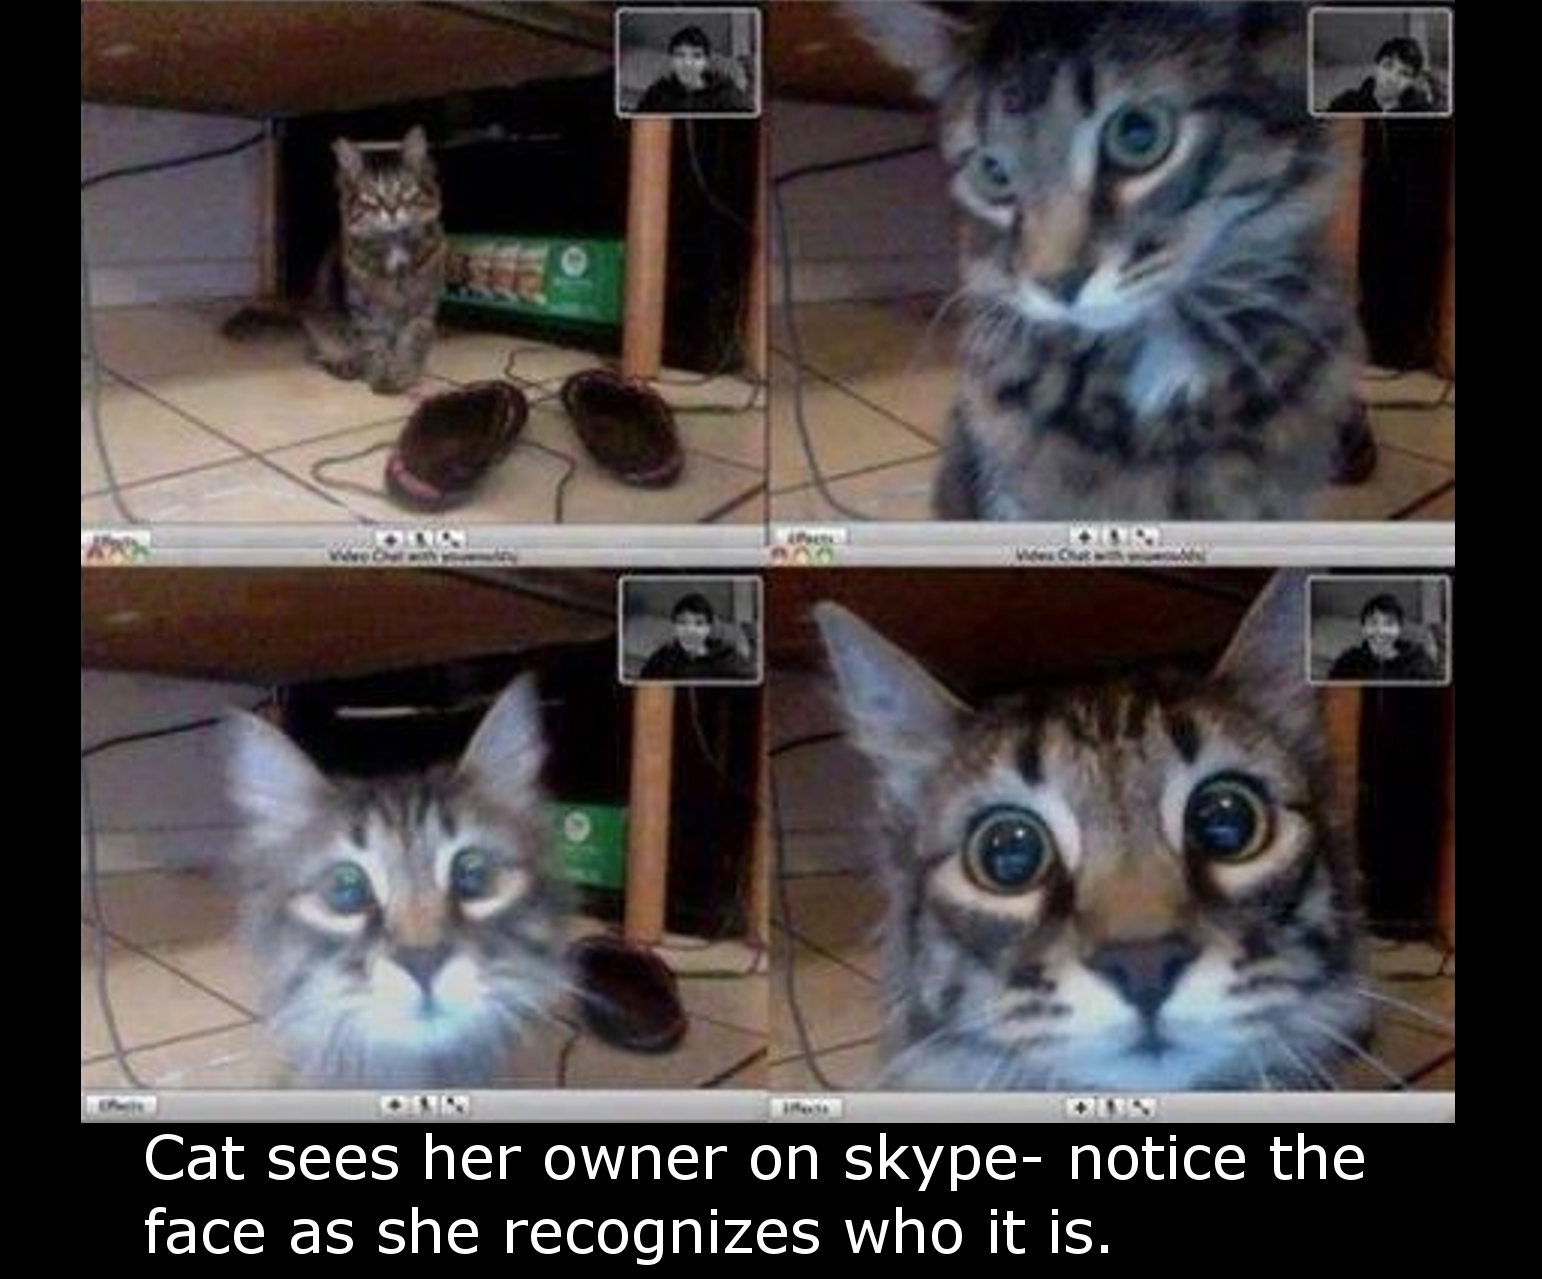 cat video chat - Cat sees her owner on skype notice the face as she recognizes who it is.